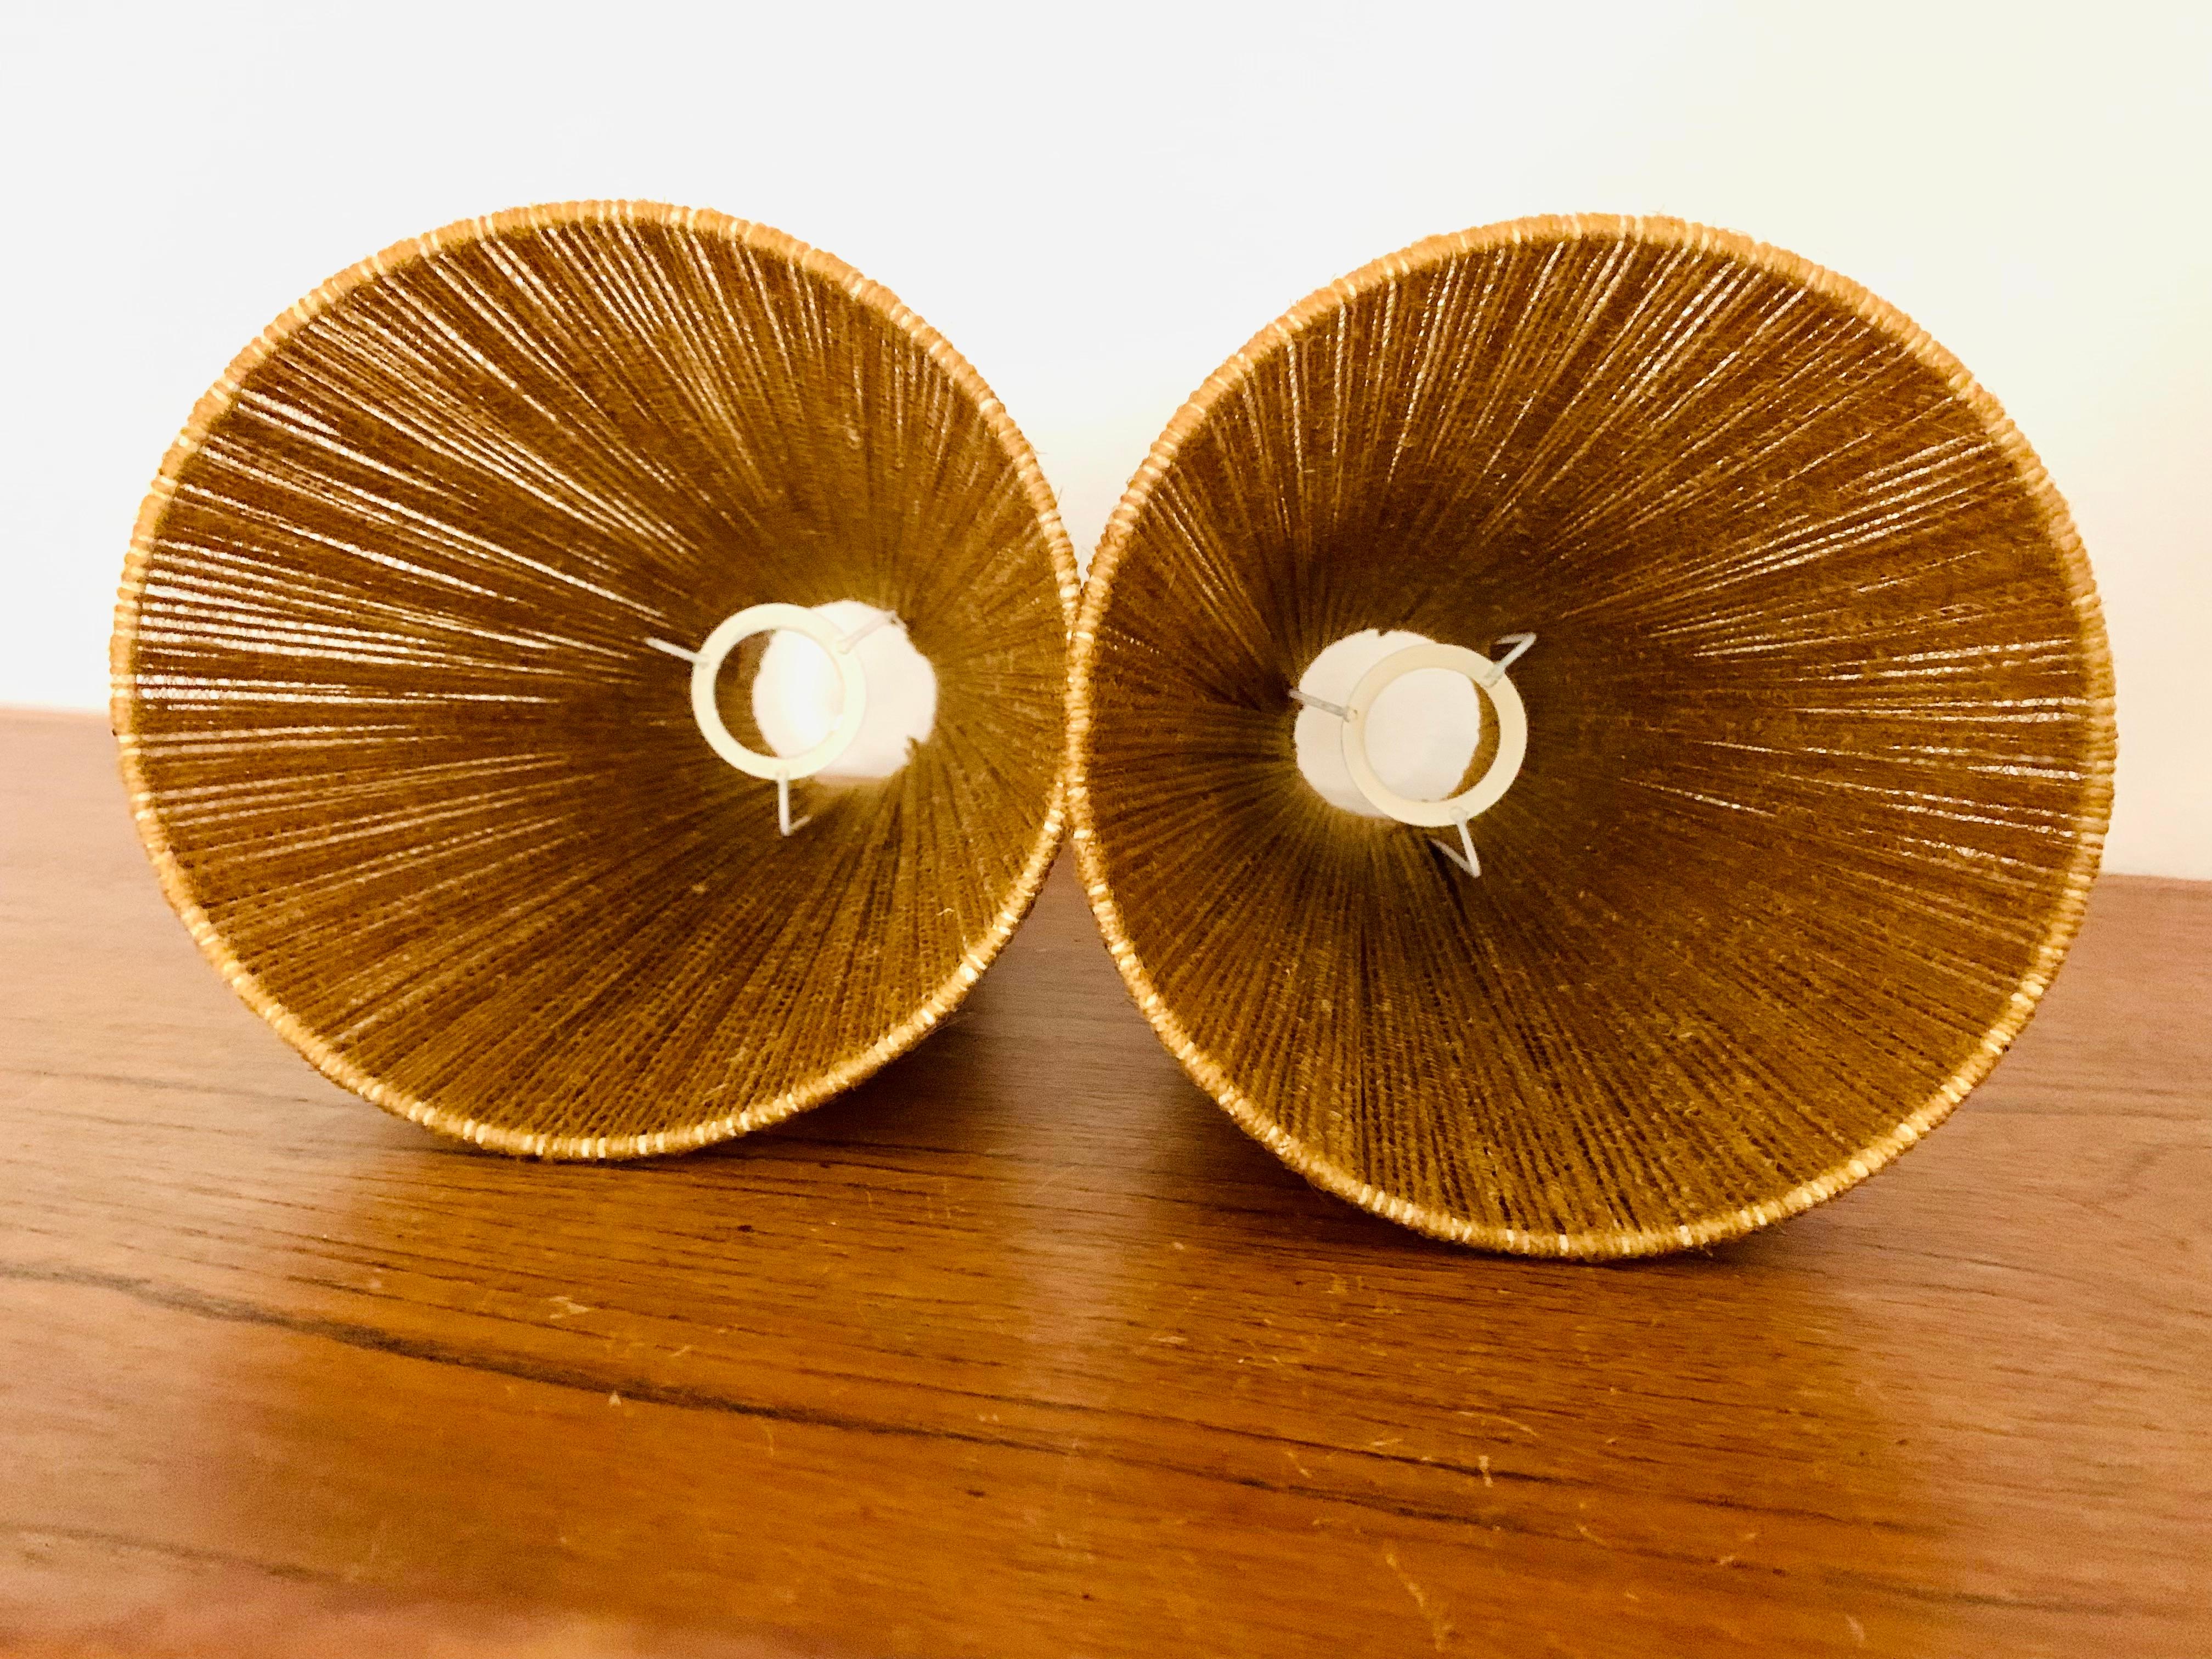 Sisal and Teak Cascading Lamp by Temde For Sale 8